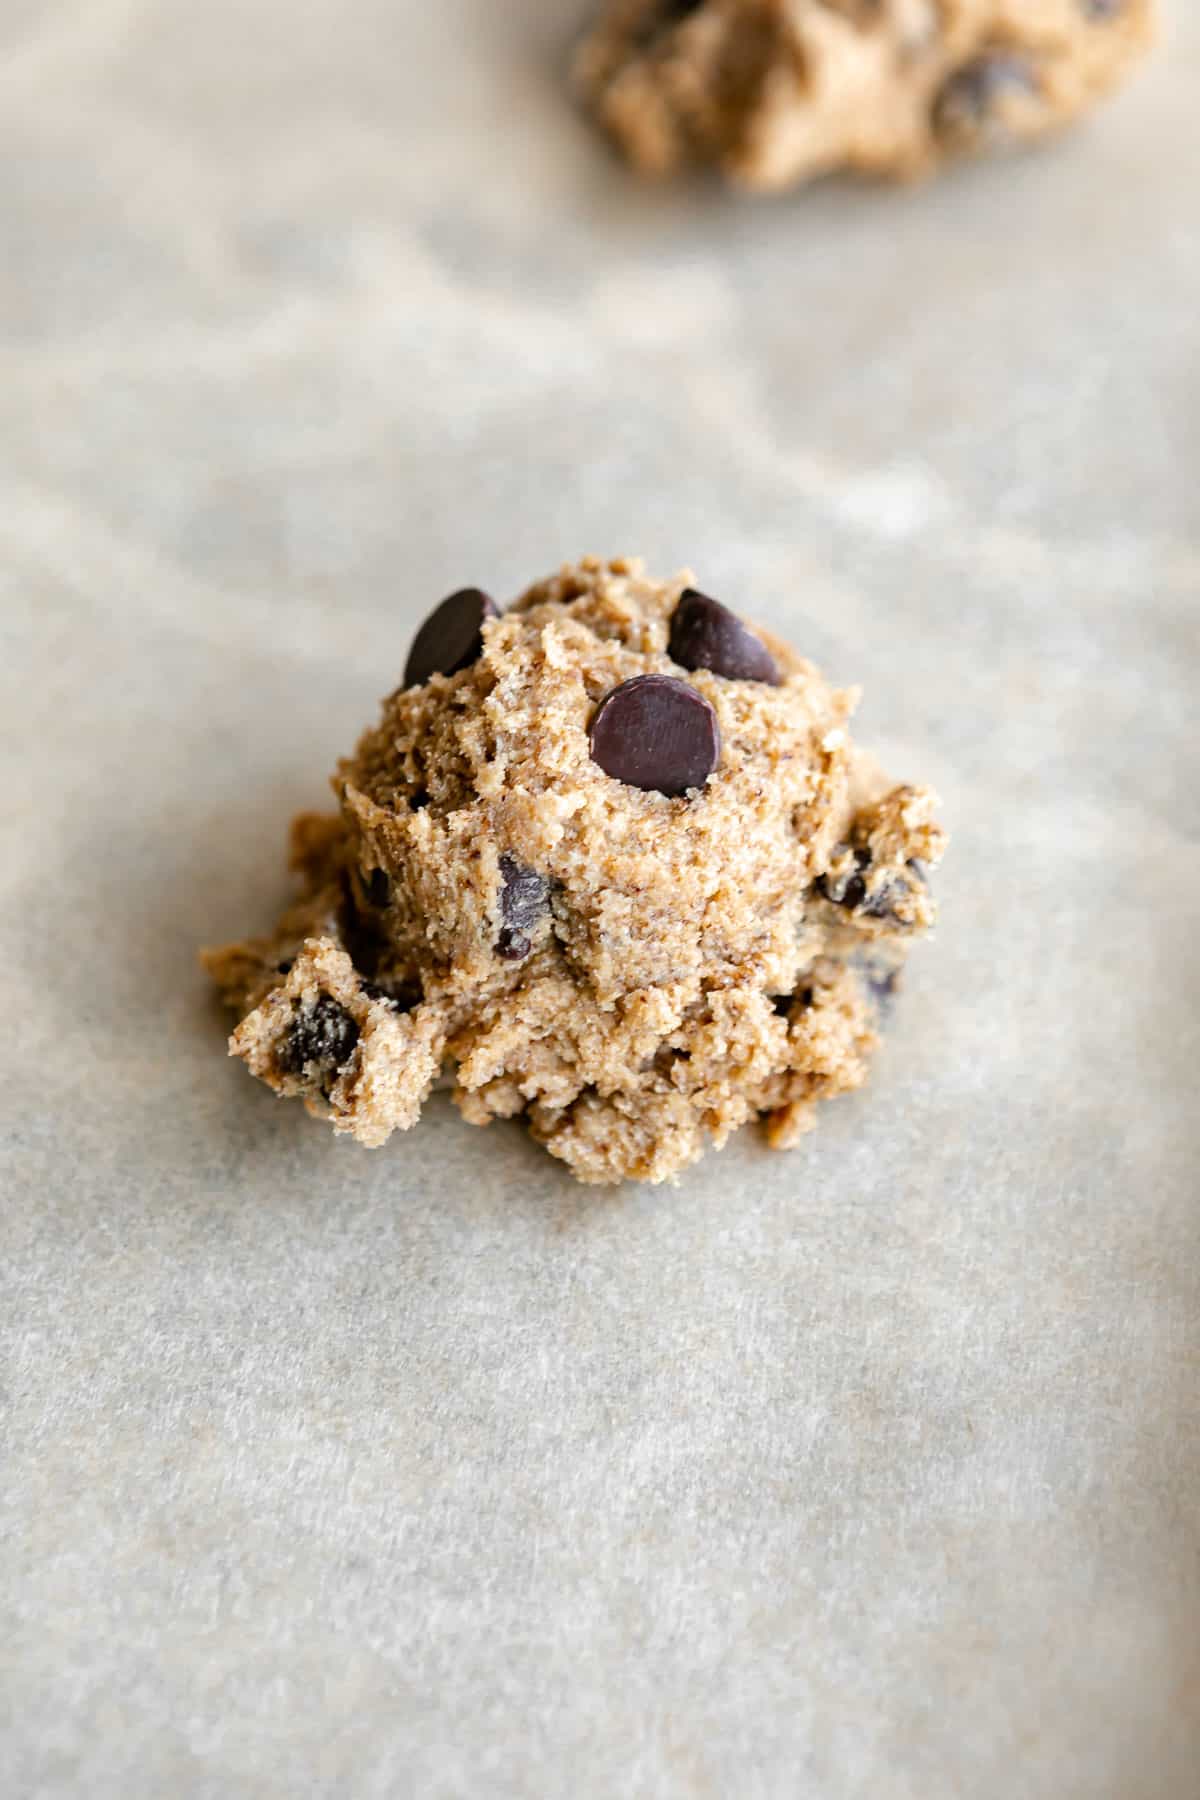 scoop of coffee cookie dough with chocolate chips before baking